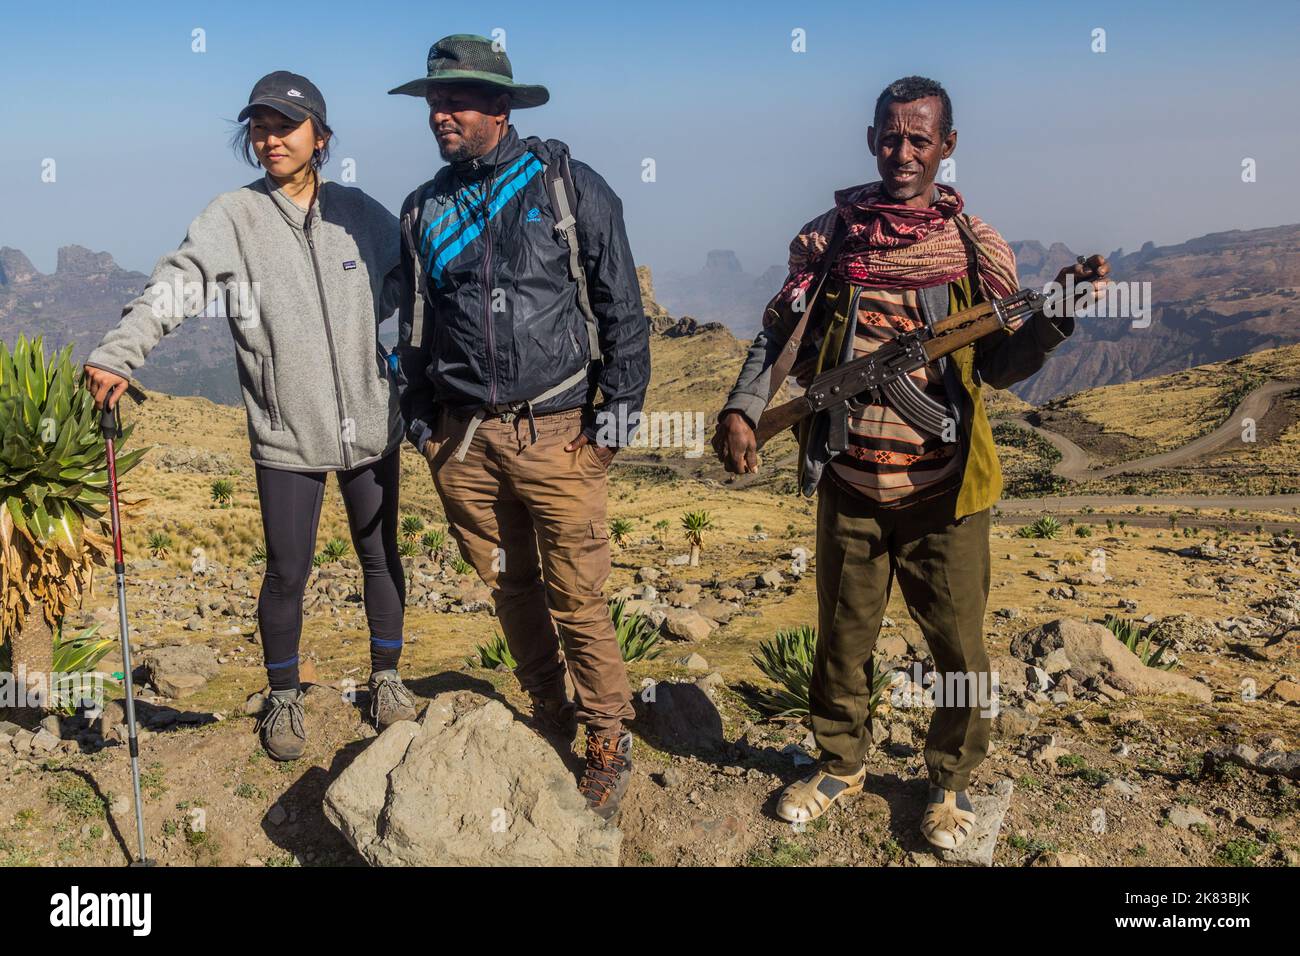 SIMIEN MOUNTAINS, ETHIOPIA - MARCH 17, 2019: Tourist, local tour guide and an armed scout guarding tourists in Simien mountains, Ethiopia Stock Photo